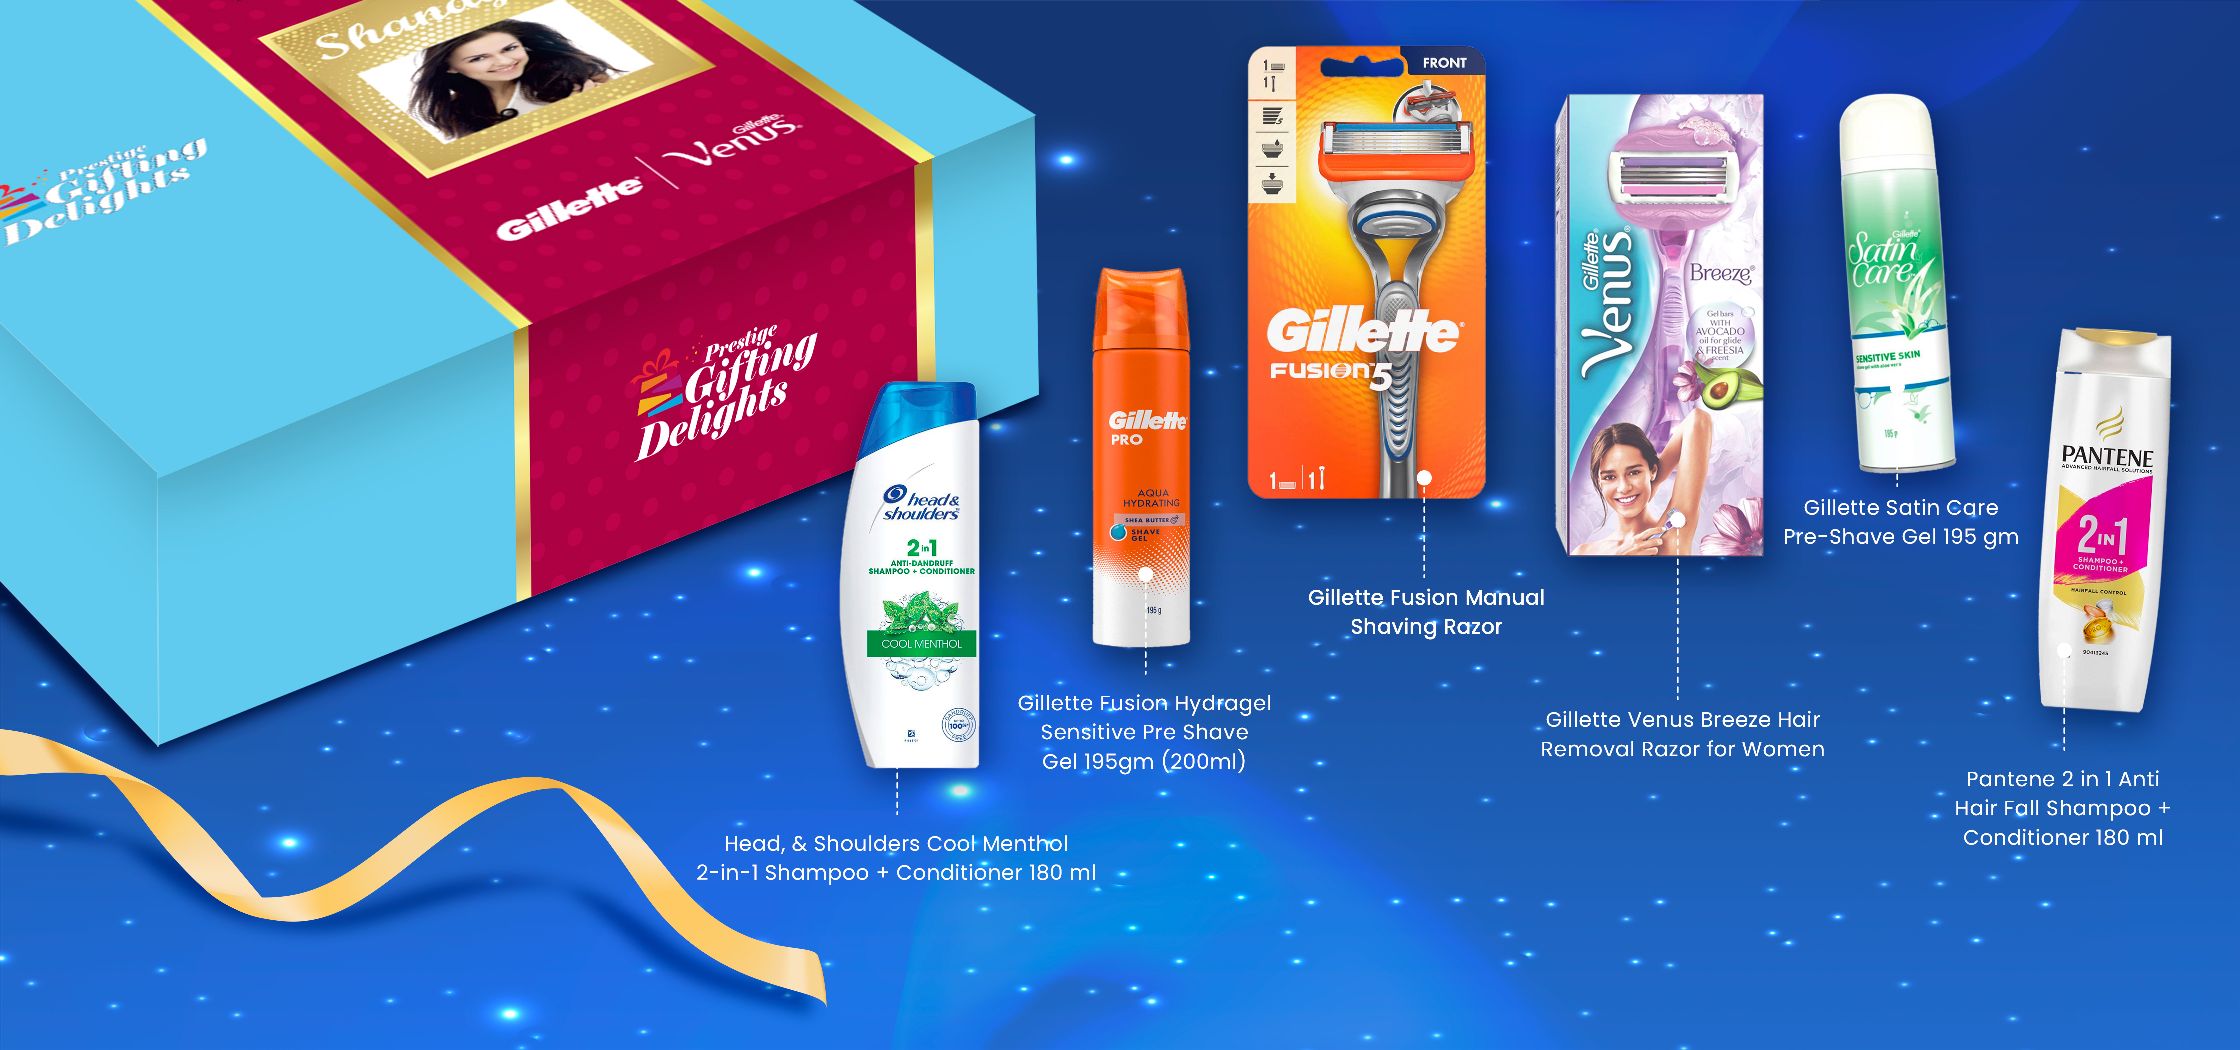 Gillette Venus + Fusion Manual Shaving & Haircare Corporate Kit For Him And Her